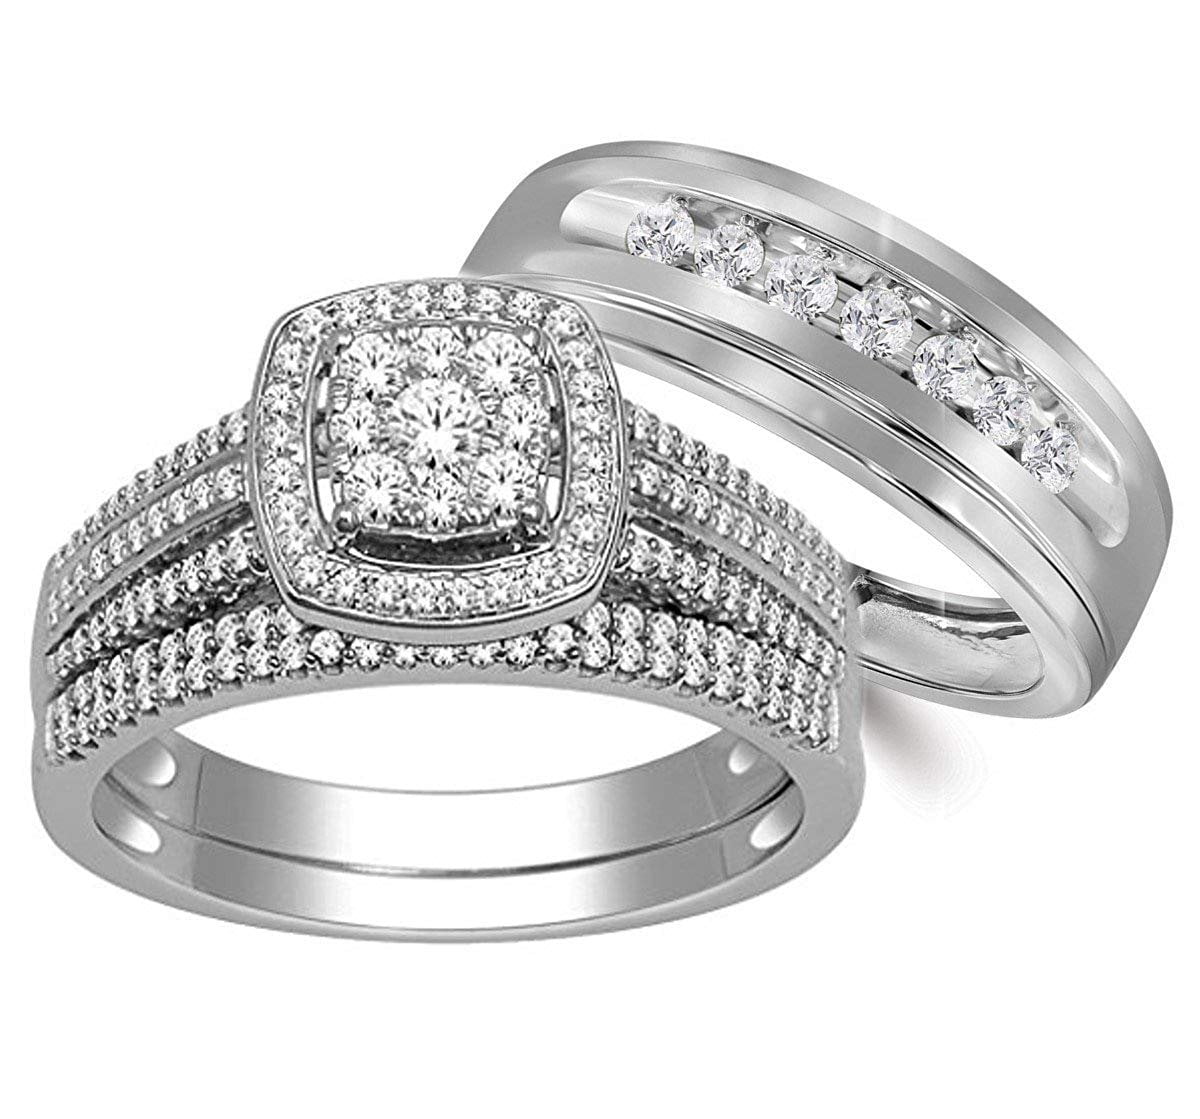 Midwest Jewellery 10K White Gold His And Her Rings Trio Wedding Rings Set  3/4ctw Diamonds (i2/i3, I/j)